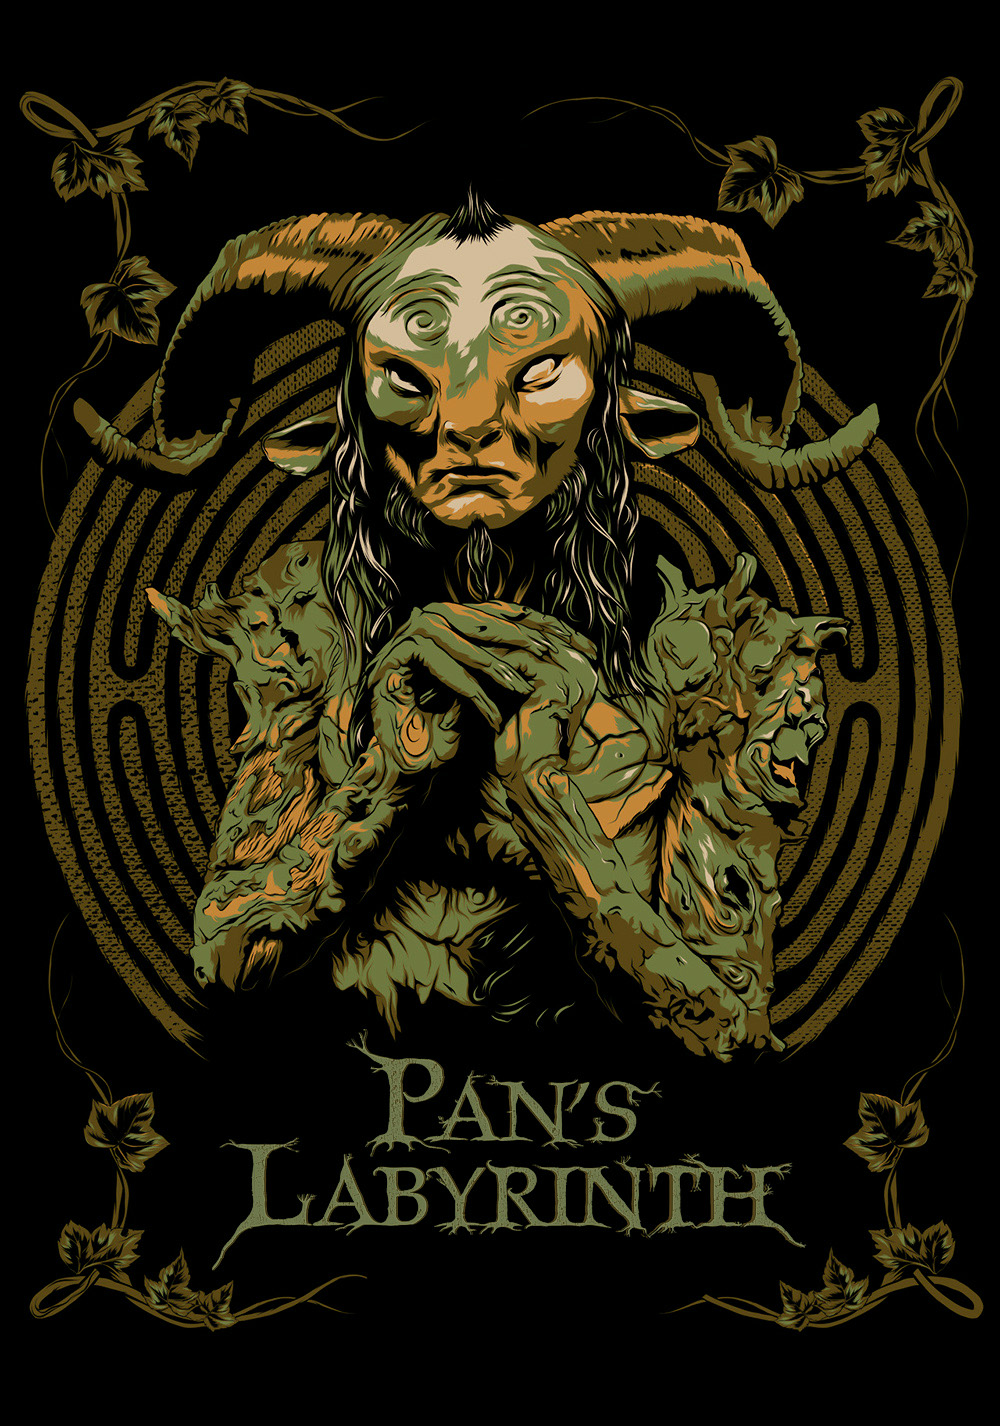 Pan's Labyrinth Movie Poster Image - Pan's Labyrinth Poster , HD Wallpaper & Backgrounds